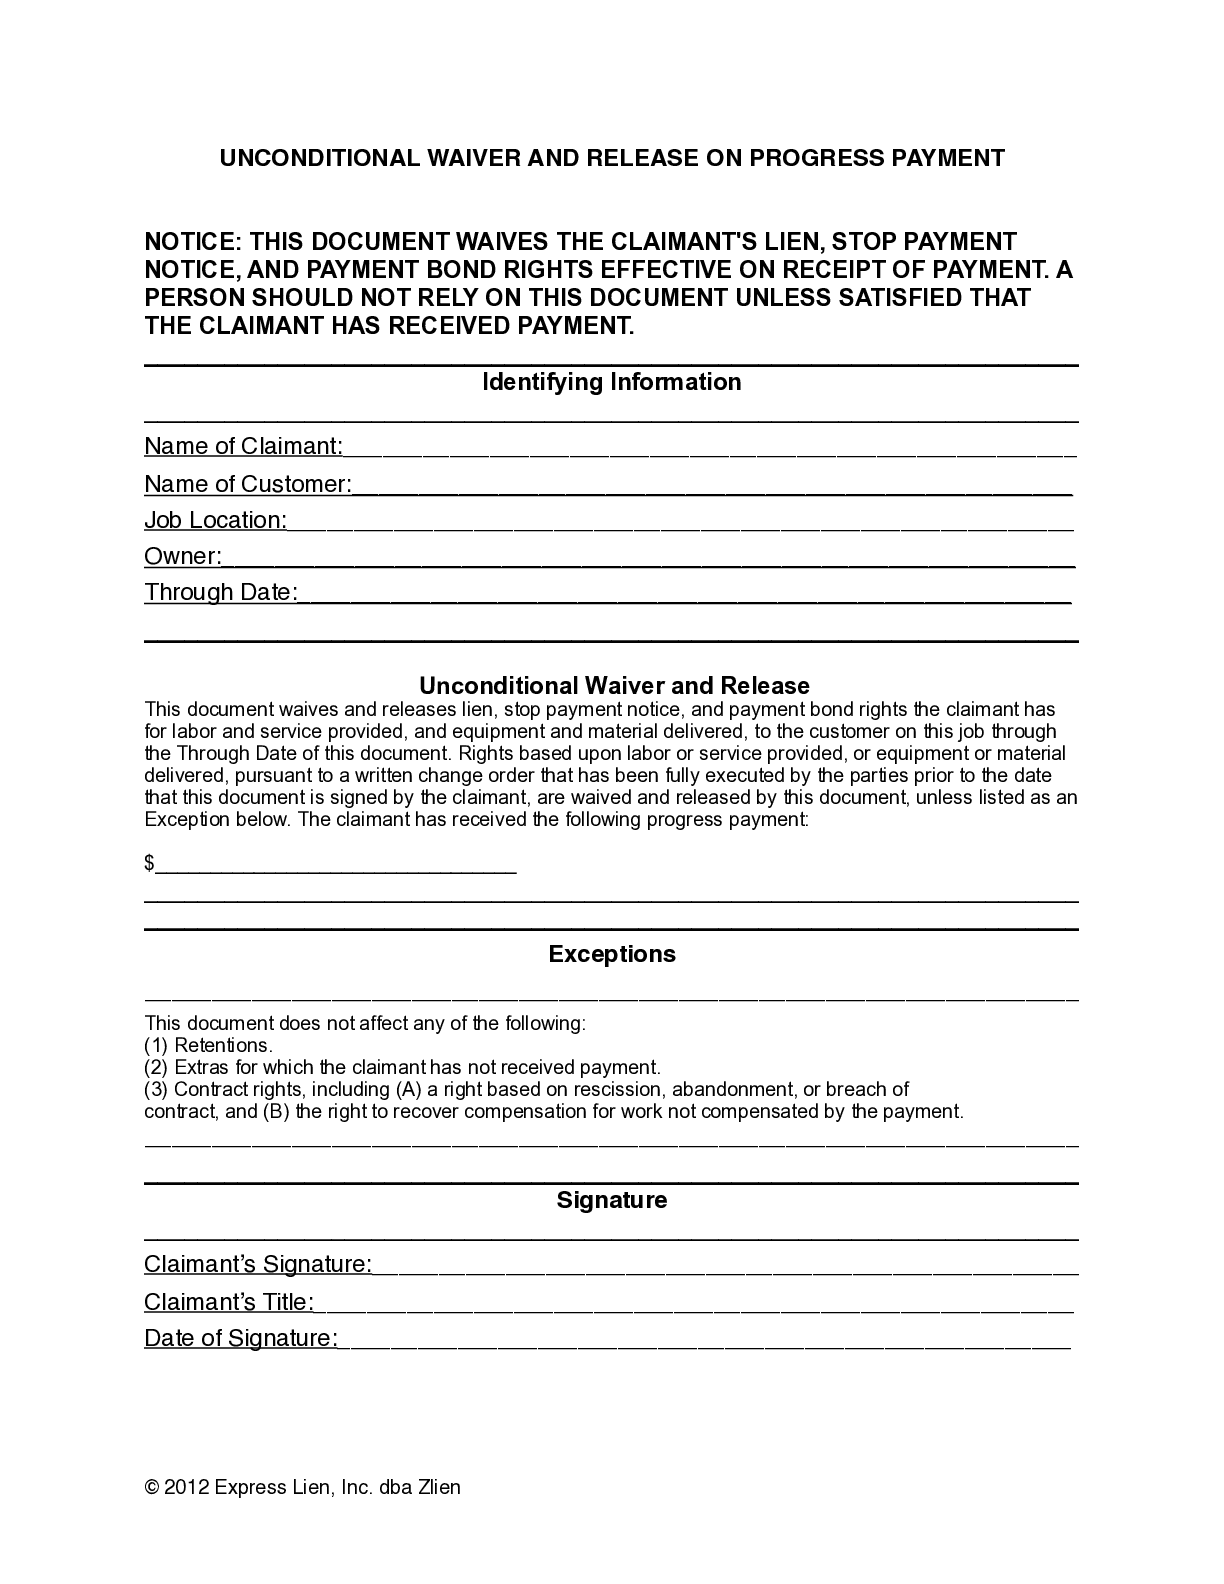 Ohio Partial Unconditional Lien Waiver Form - free from